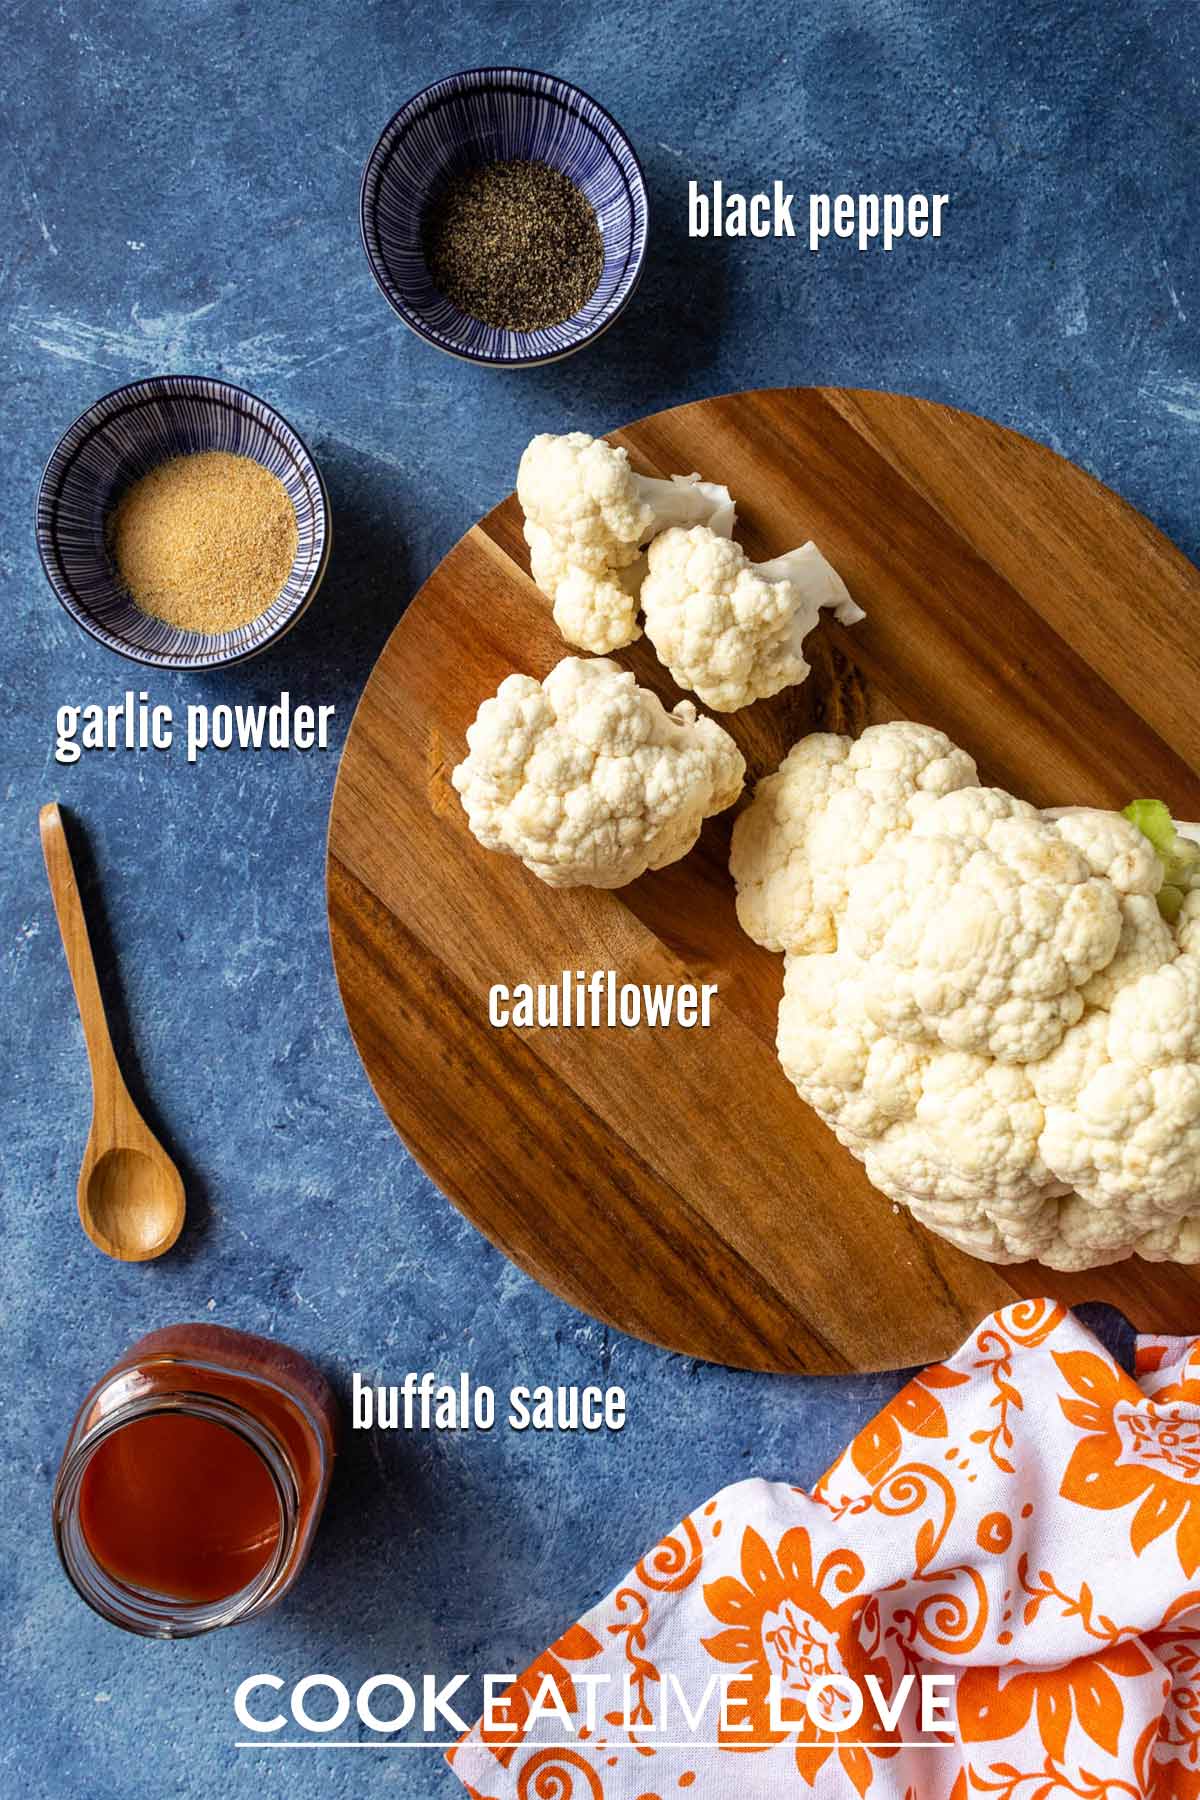 Ingredients to make air fryer buffalo cauliflower on the table with text labels.